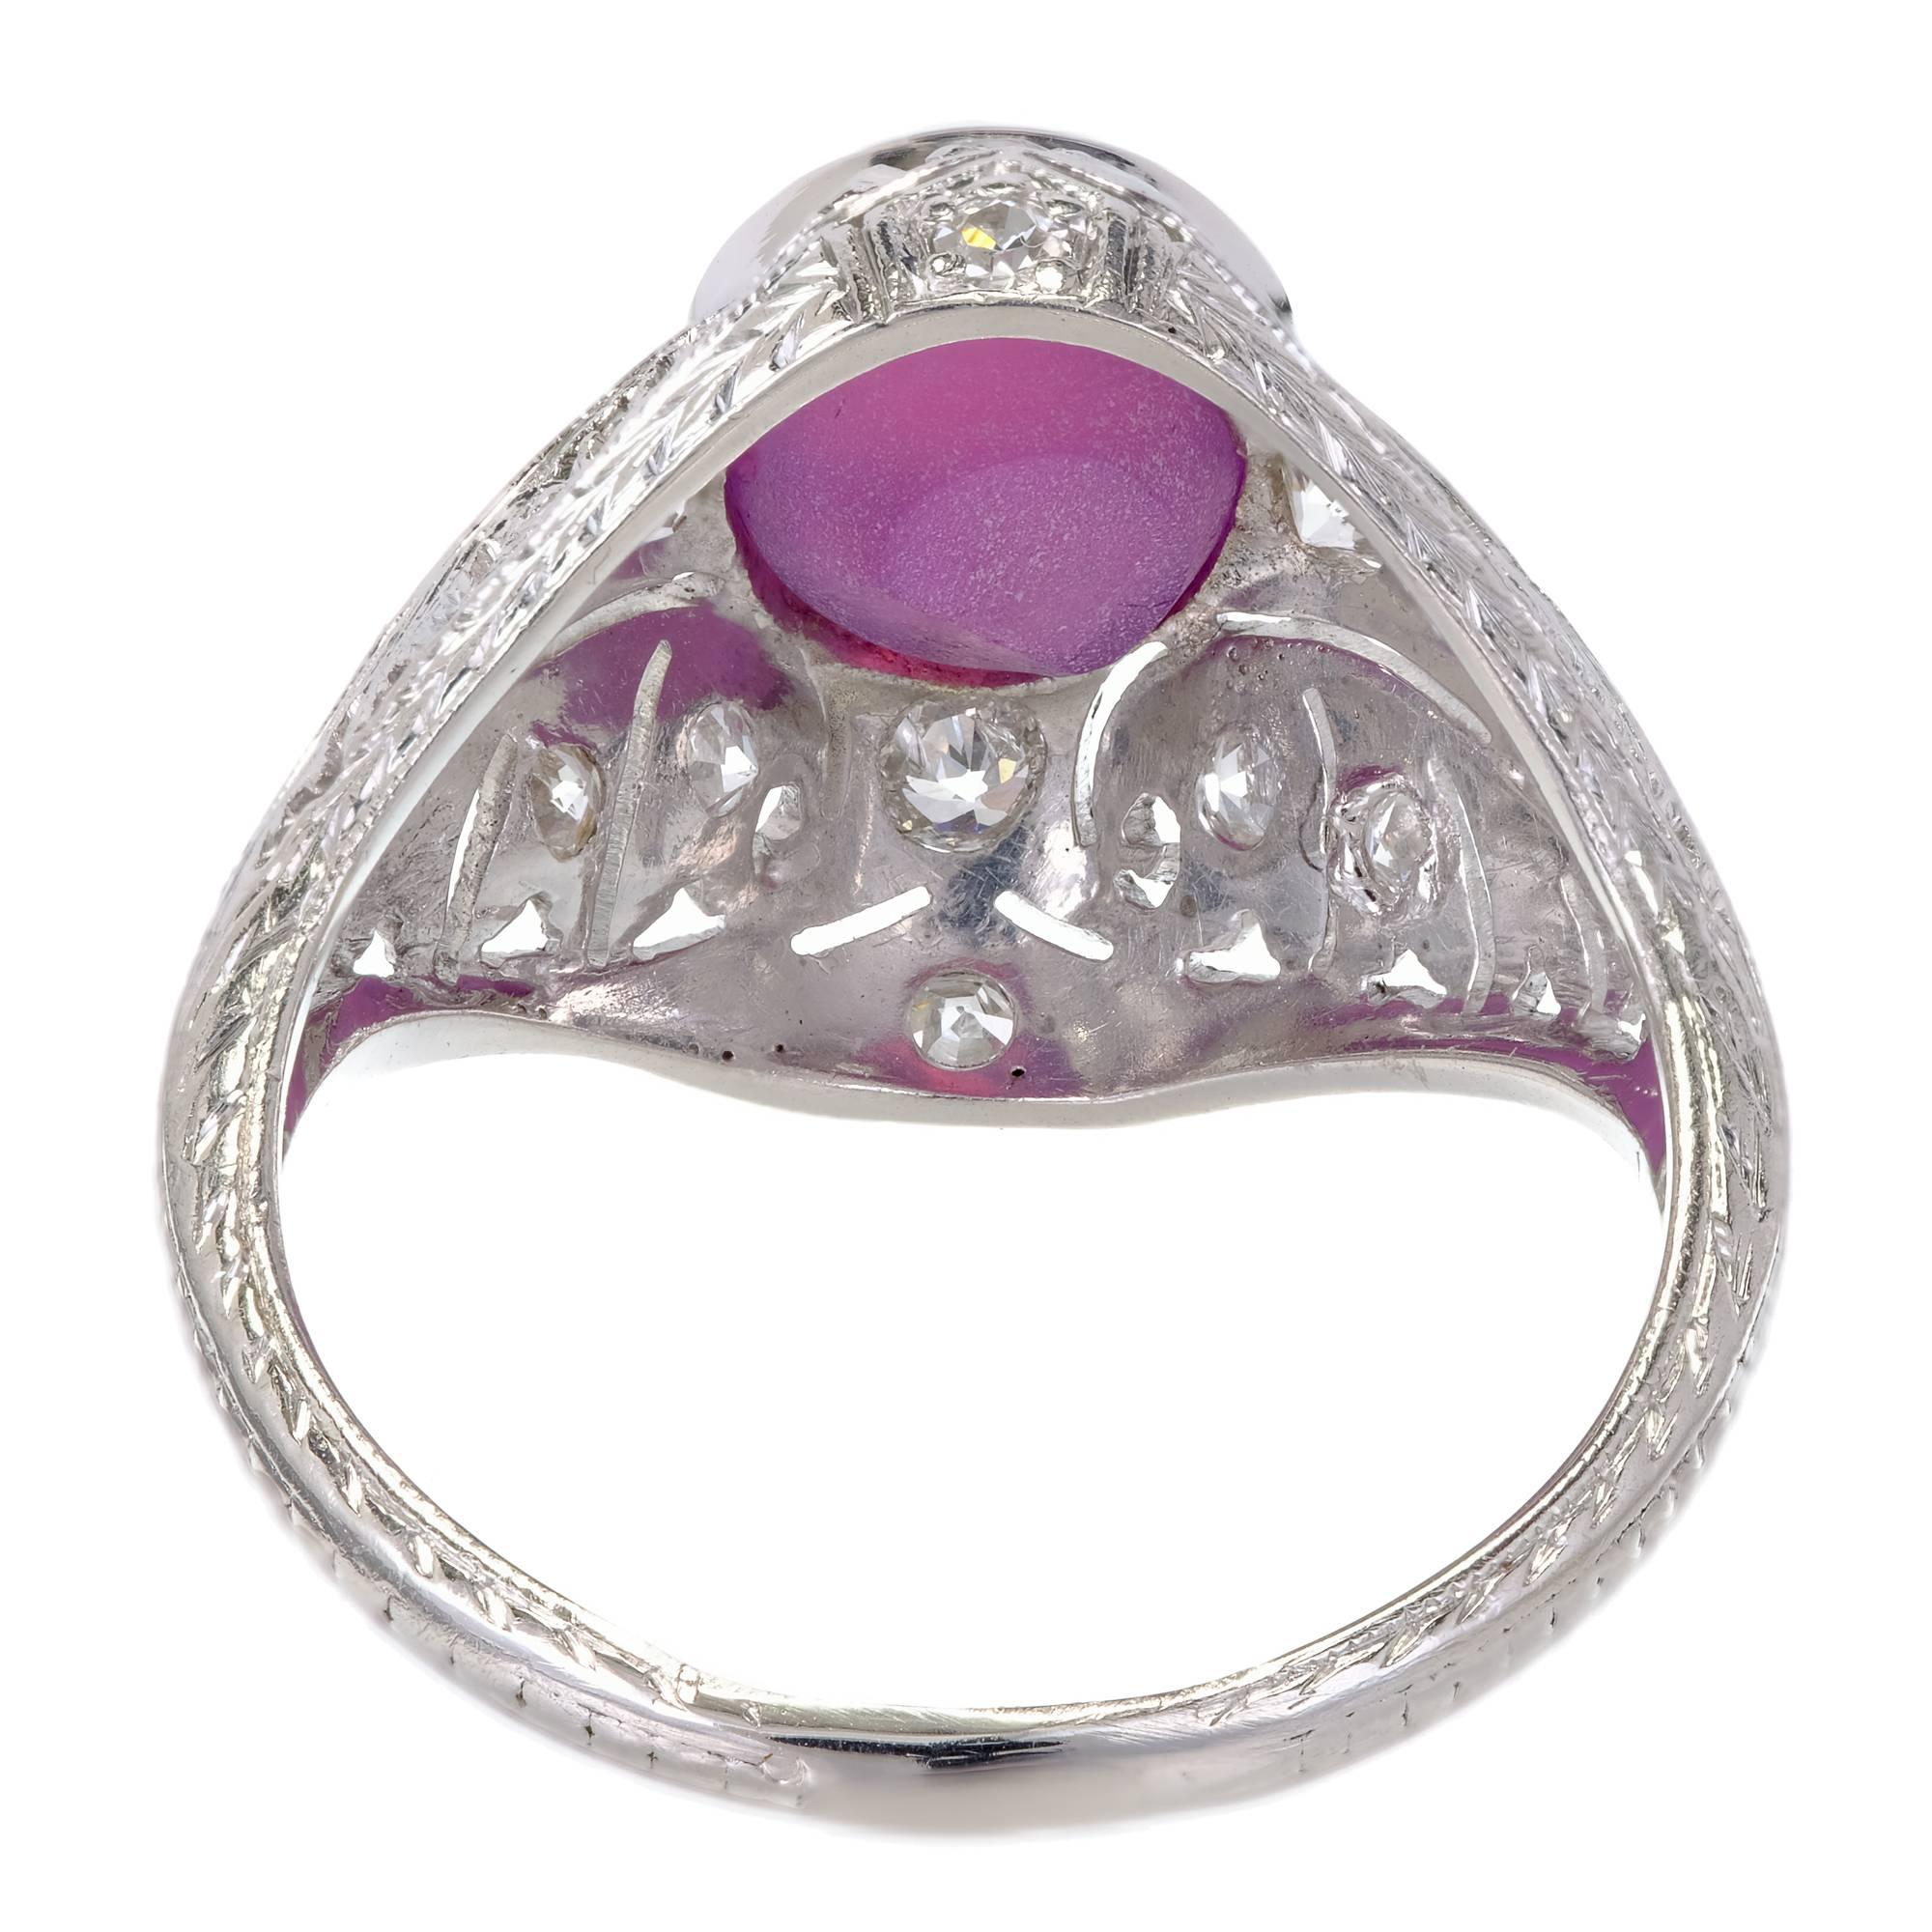 GIA Certified 3.40 Carat Star Ruby Diamond Art Deco 1920s Platinum Cocktail Ring For Sale 1